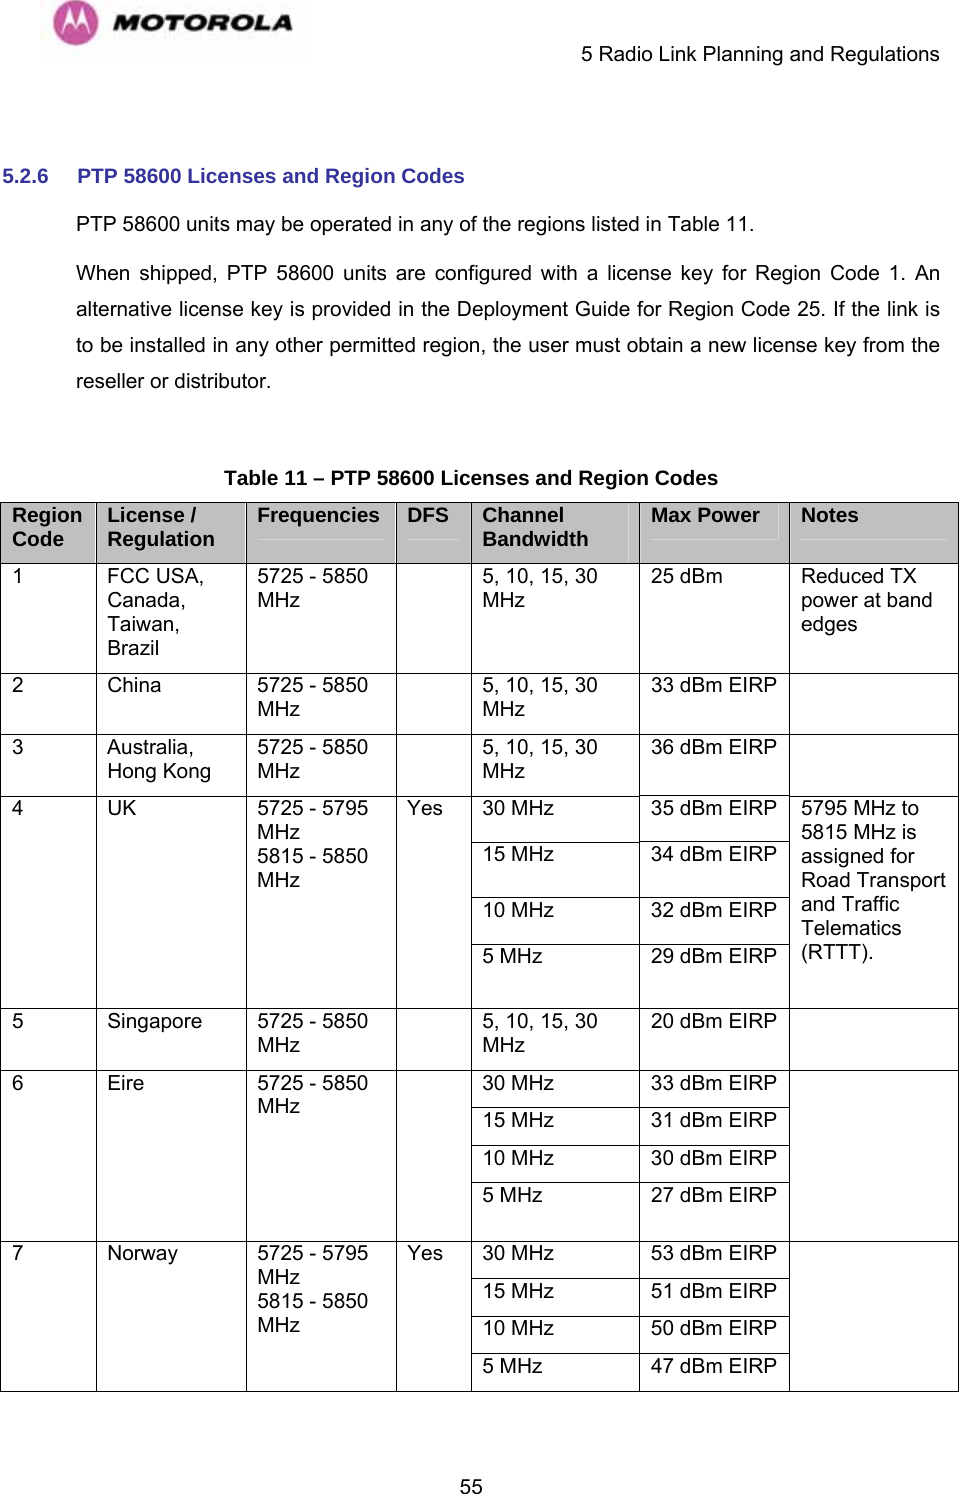     5 Radio Link Planning and Regulations  55 5.2.6  PTP 58600 Licenses and Region Codes PTP 58600 units may be operated in any of the regions listed in Table 11. When shipped, PTP 58600 units are configured with a license key for Region Code 1. An alternative license key is provided in the Deployment Guide for Region Code 25. If the link is to be installed in any other permitted region, the user must obtain a new license key from the reseller or distributor.  Table 11 – PTP 58600 Licenses and Region Codes Region Code  License / Regulation  Frequencies  DFS  Channel Bandwidth  Max Power  Notes 1 FCC USA, Canada, Taiwan, Brazil 5725 - 5850 MHz    5, 10, 15, 30 MHz 25 dBm  Reduced TX power at band edges 2 China  5725 - 5850 MHz    5, 10, 15, 30 MHz 33 dBm EIRP    3 Australia, Hong Kong 5725 - 5850 MHz    5, 10, 15, 30 MHz 36 dBm EIRP    30 MHz  35 dBm EIRP 15 MHz  34 dBm EIRP 10 MHz  32 dBm EIRP 4   UK  5725 - 5795 MHz 5815 - 5850 MHz Yes 5 MHz  29 dBm EIRP 5795 MHz to 5815 MHz is assigned for Road Transport and Traffic Telematics (RTTT). 5 Singapore 5725 - 5850 MHz    5, 10, 15, 30 MHz 20 dBm EIRP    30 MHz  33 dBm EIRP 15 MHz  31 dBm EIRP 10 MHz  30 dBm EIRP 6       Eire       5725 - 5850 MHz                5 MHz  27 dBm EIRP         30 MHz  53 dBm EIRP 15 MHz  51 dBm EIRP 10 MHz  50 dBm EIRP 7 Norway 5725 - 5795 MHz 5815 - 5850 MHz Yes 5 MHz  47 dBm EIRP   